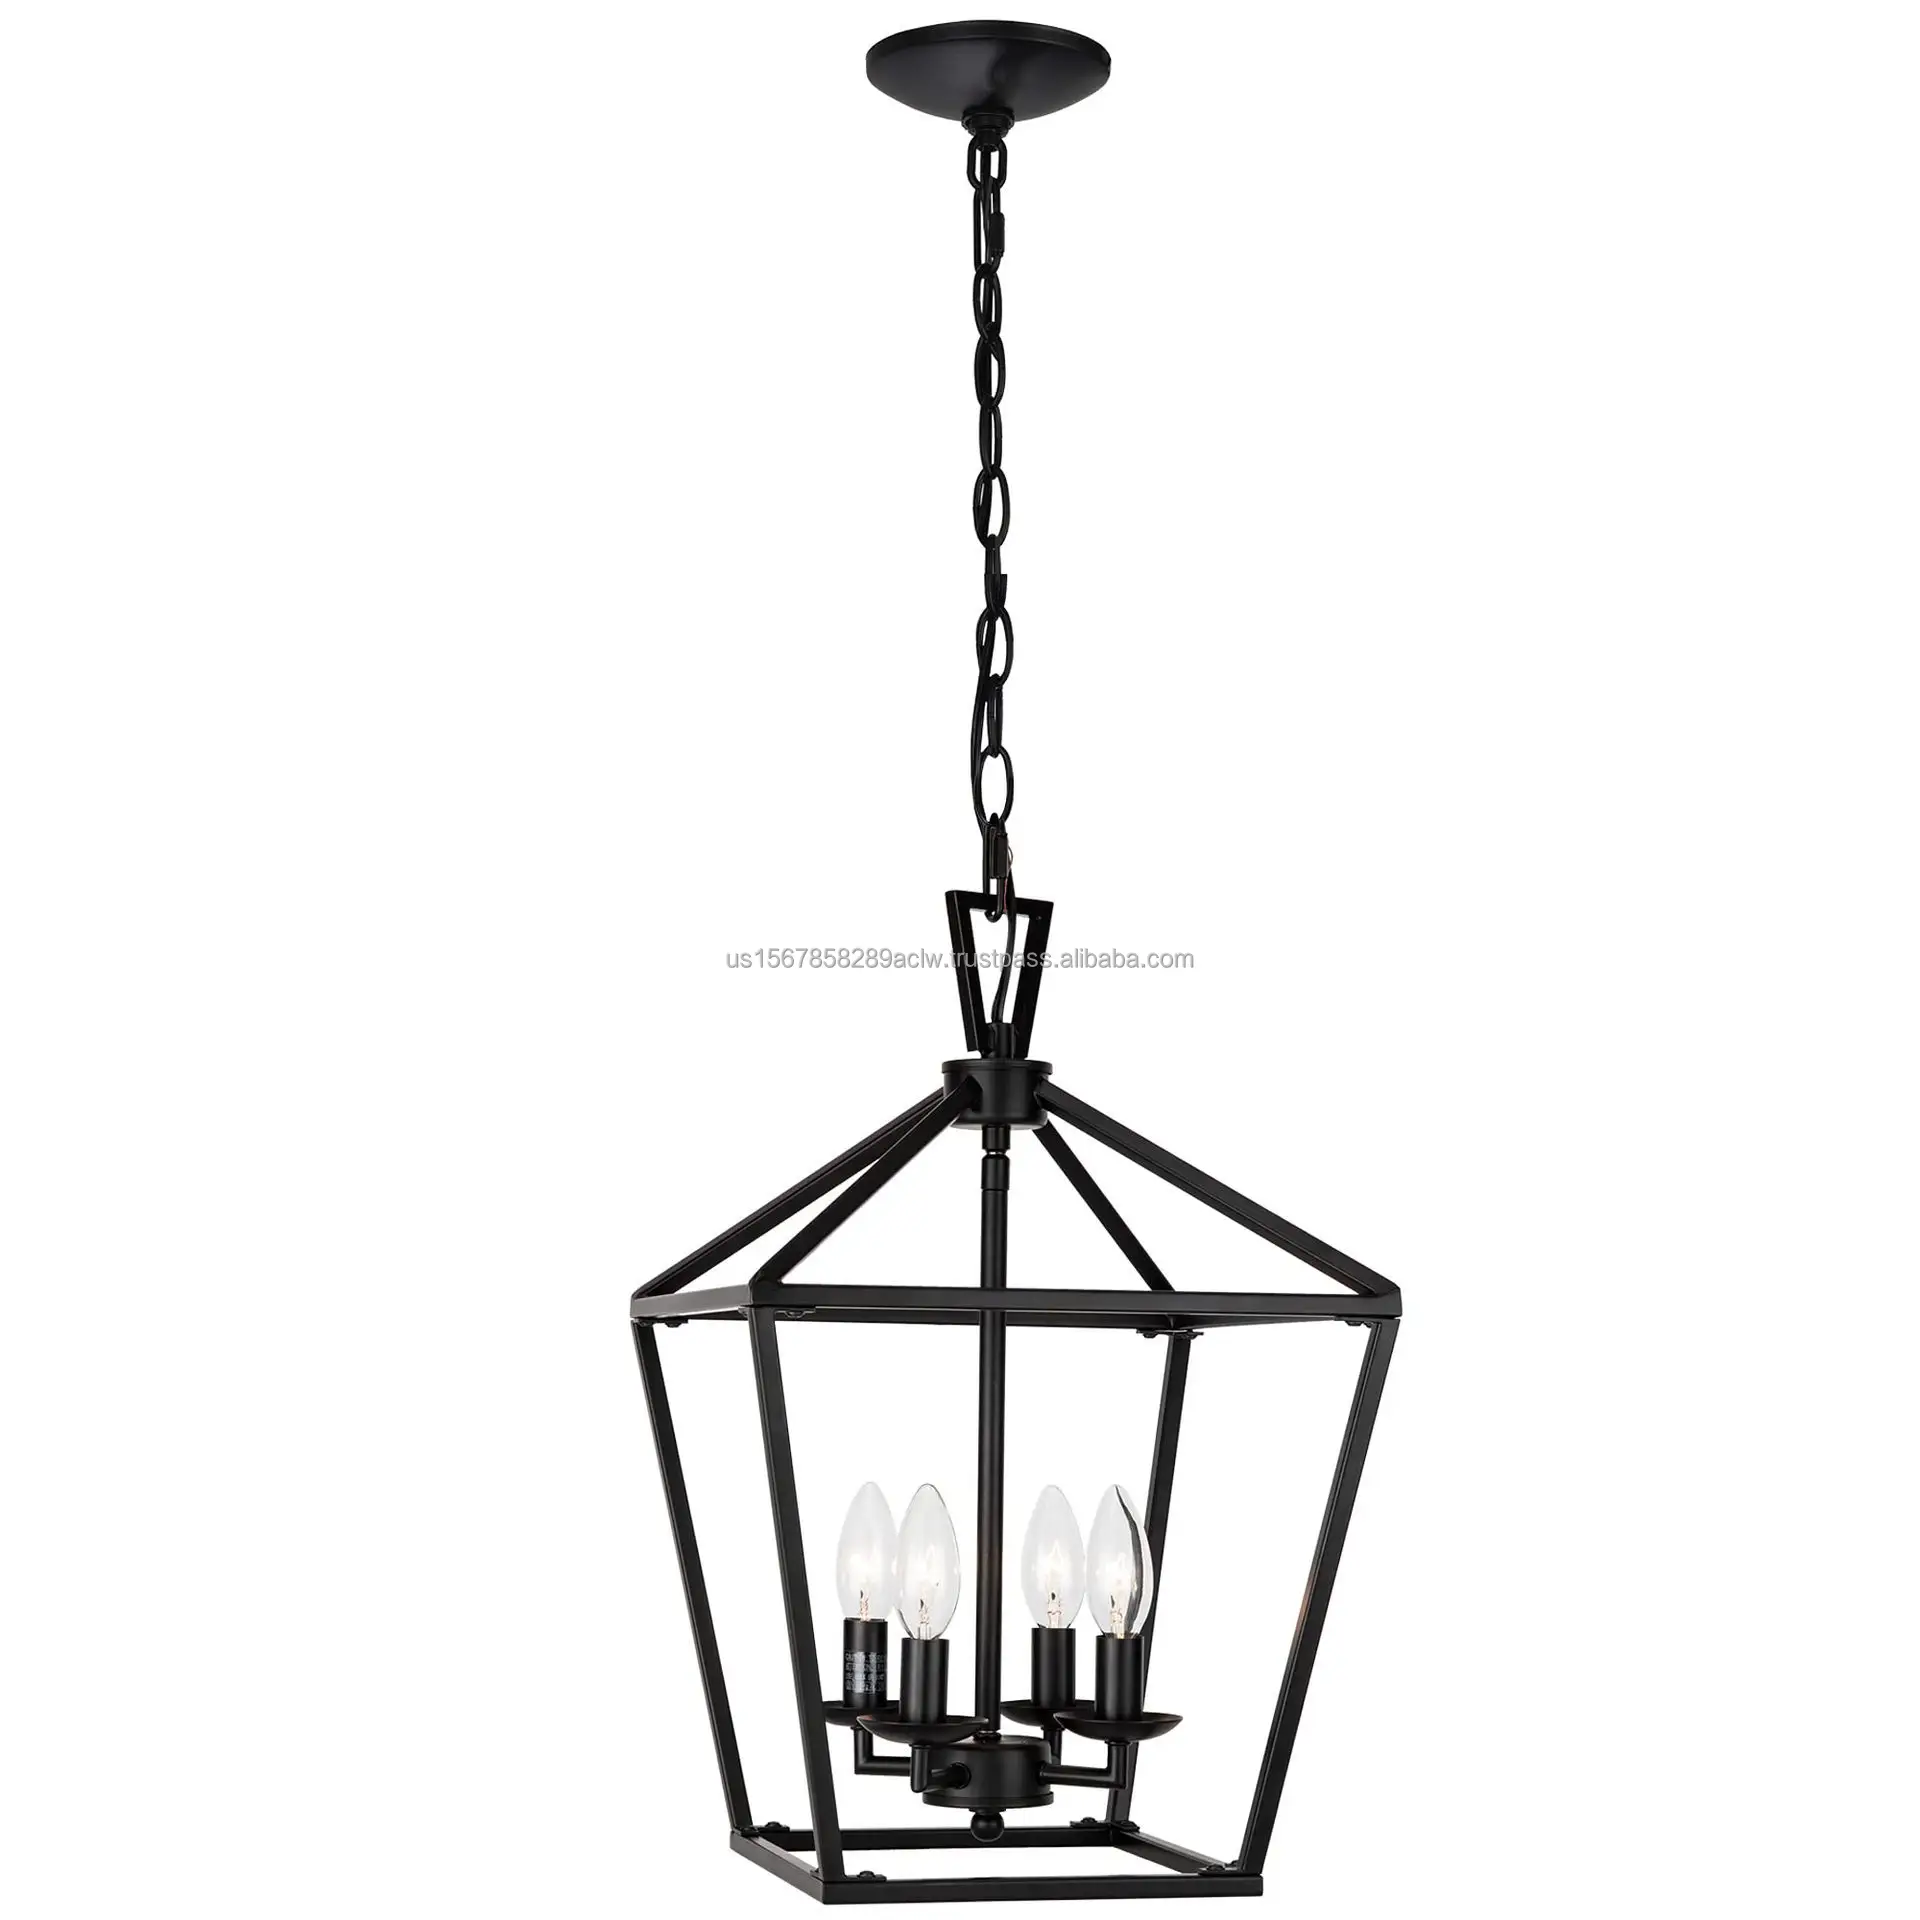 American style retro industrial pendant light 4-light black kitchen island pendant light black hanging lamp with chain